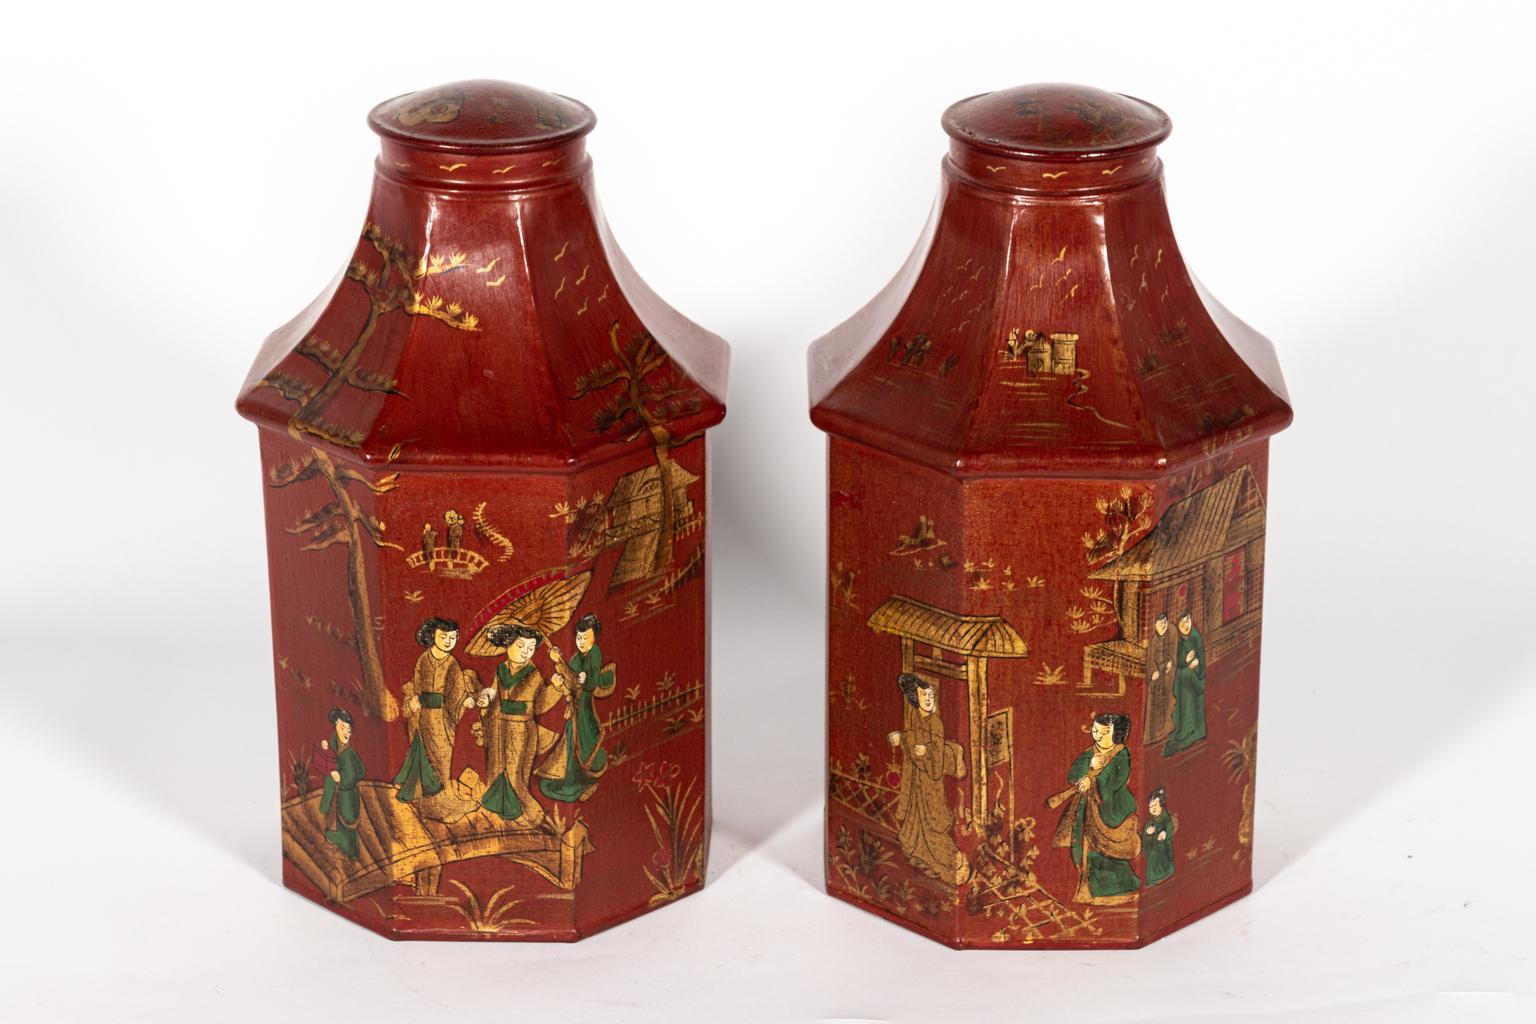 Pair of red decorated tea tins with Chinese style figures detailed throughout. Please note of wear consistent with age including chips and paint loss.